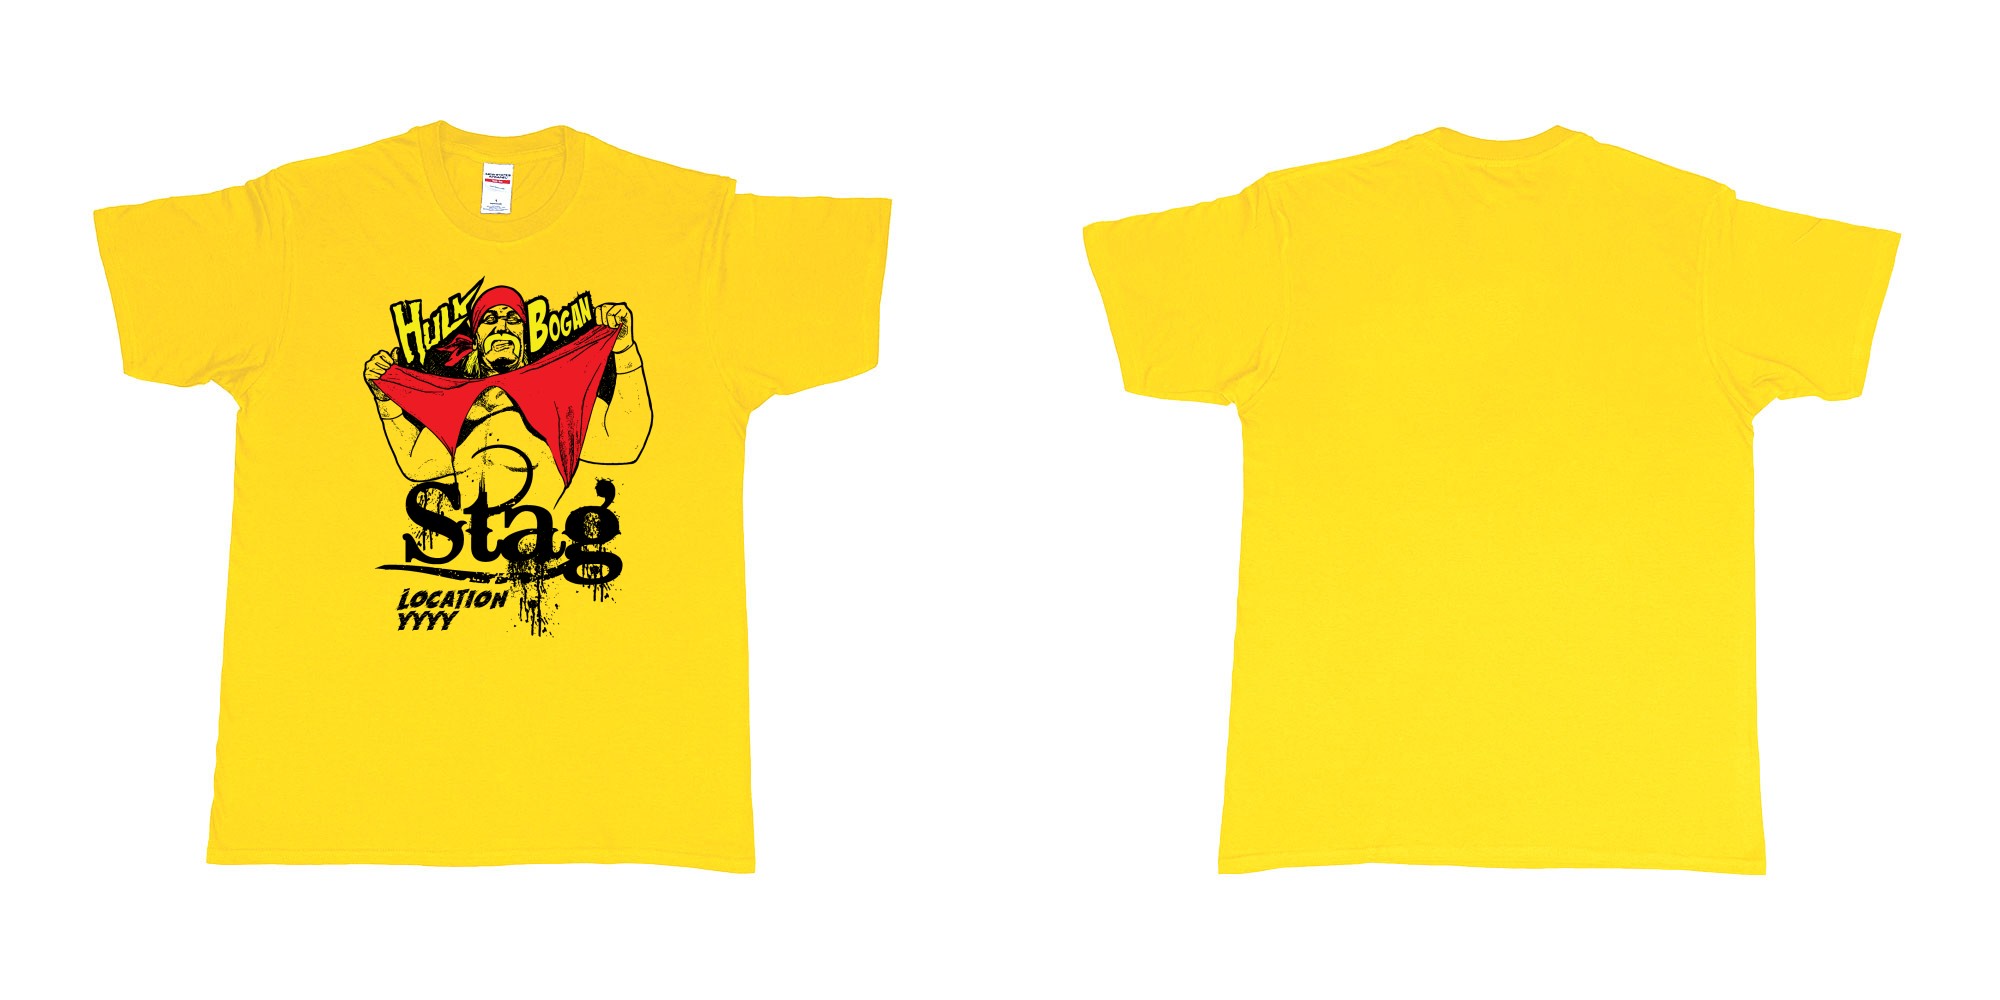 Custom tshirt design hulk hogan bogan in fabric color daisy choice your own text made in Bali by The Pirate Way